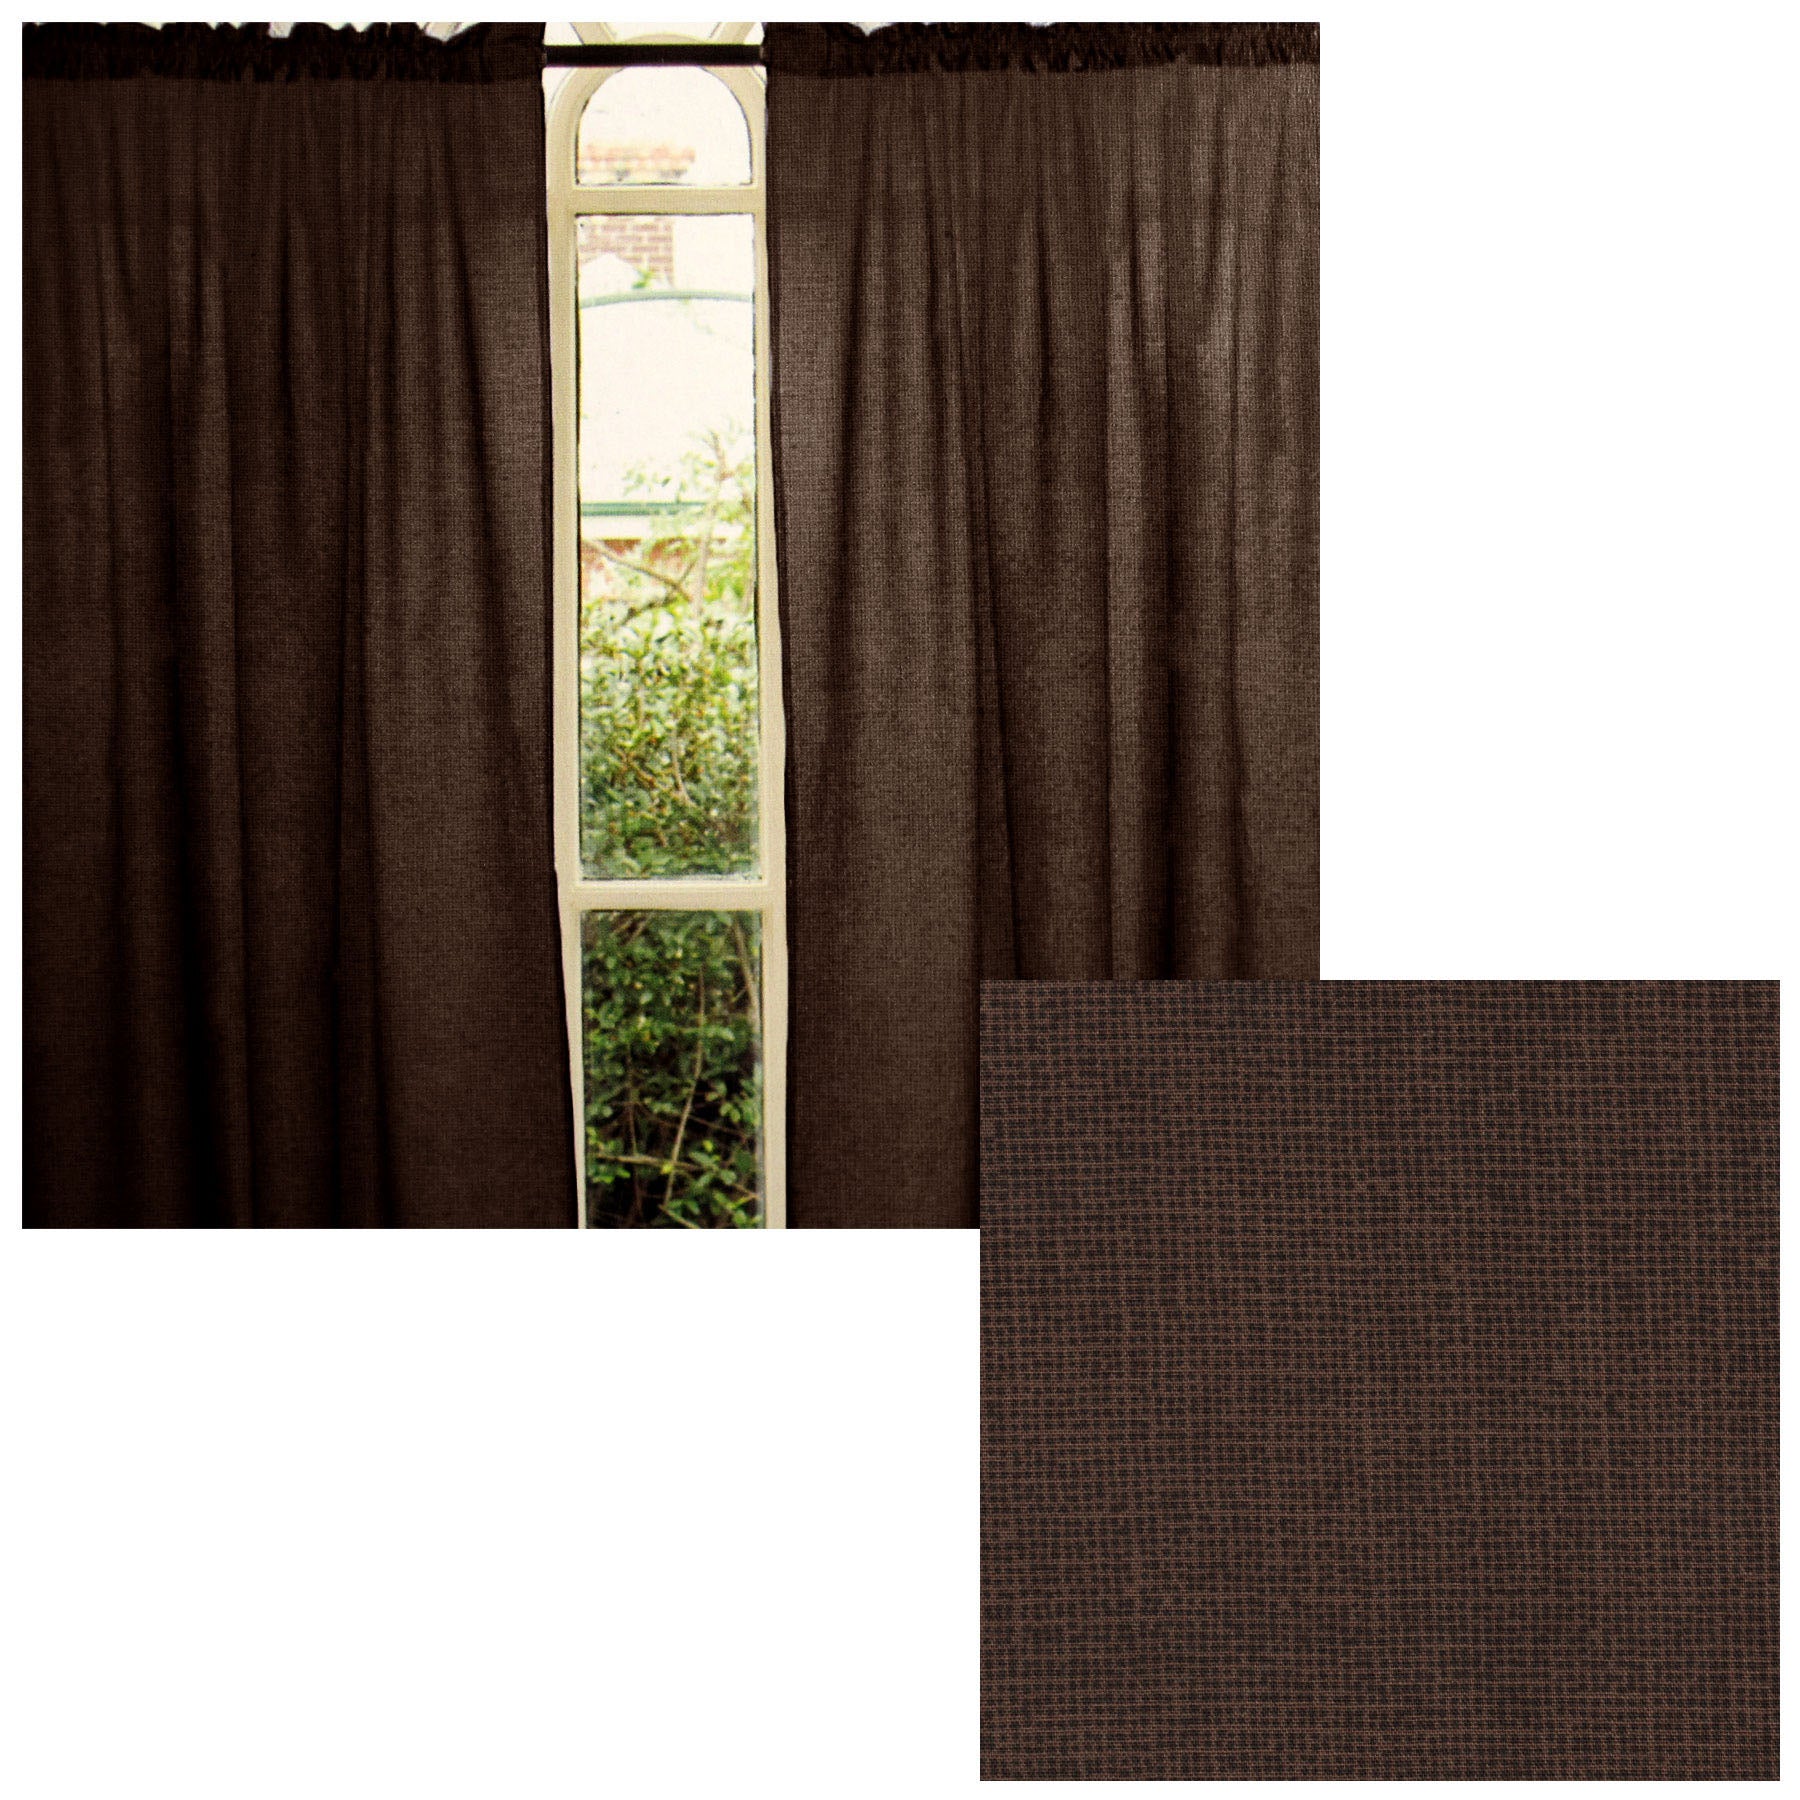 Pair of Polyester Cotton Rod Pocket Unlined Curtains 110 x 213 cm each Chocolate Dots - SILBERSHELL